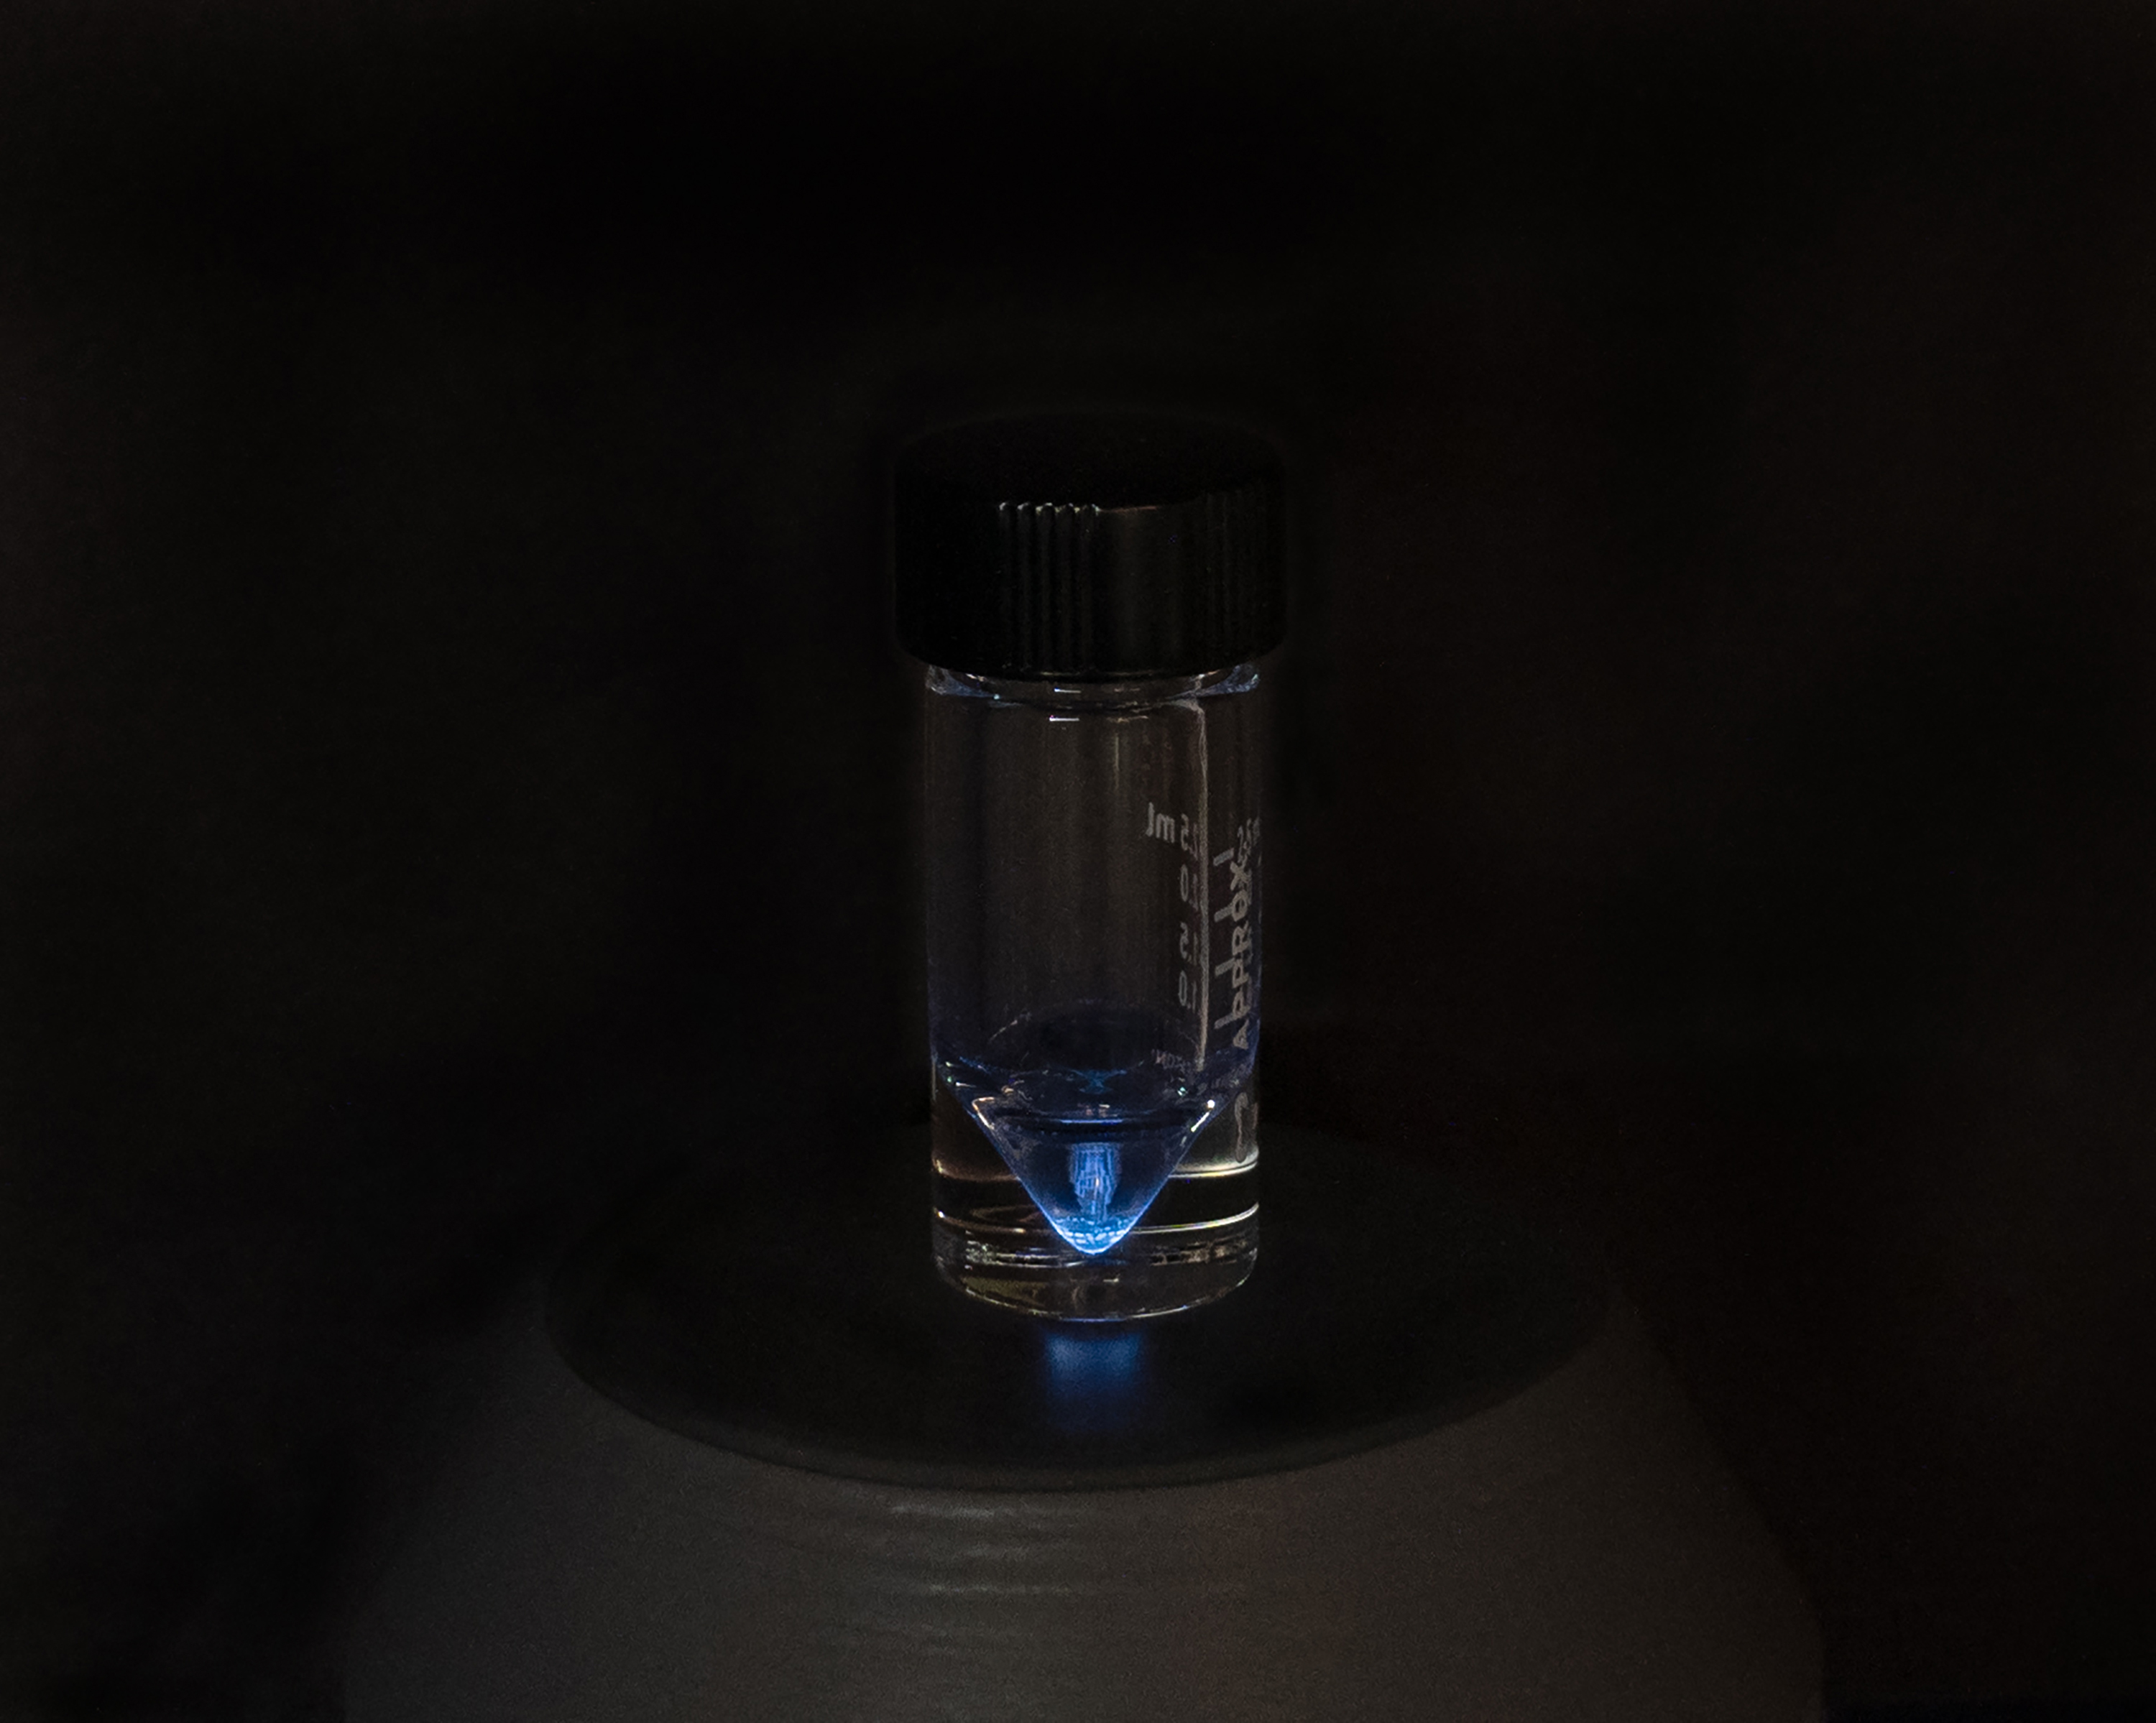 This long-exposure image makes it possible to see the glow of actinium-225, an isotope that shows great promise for treating cancer. 

